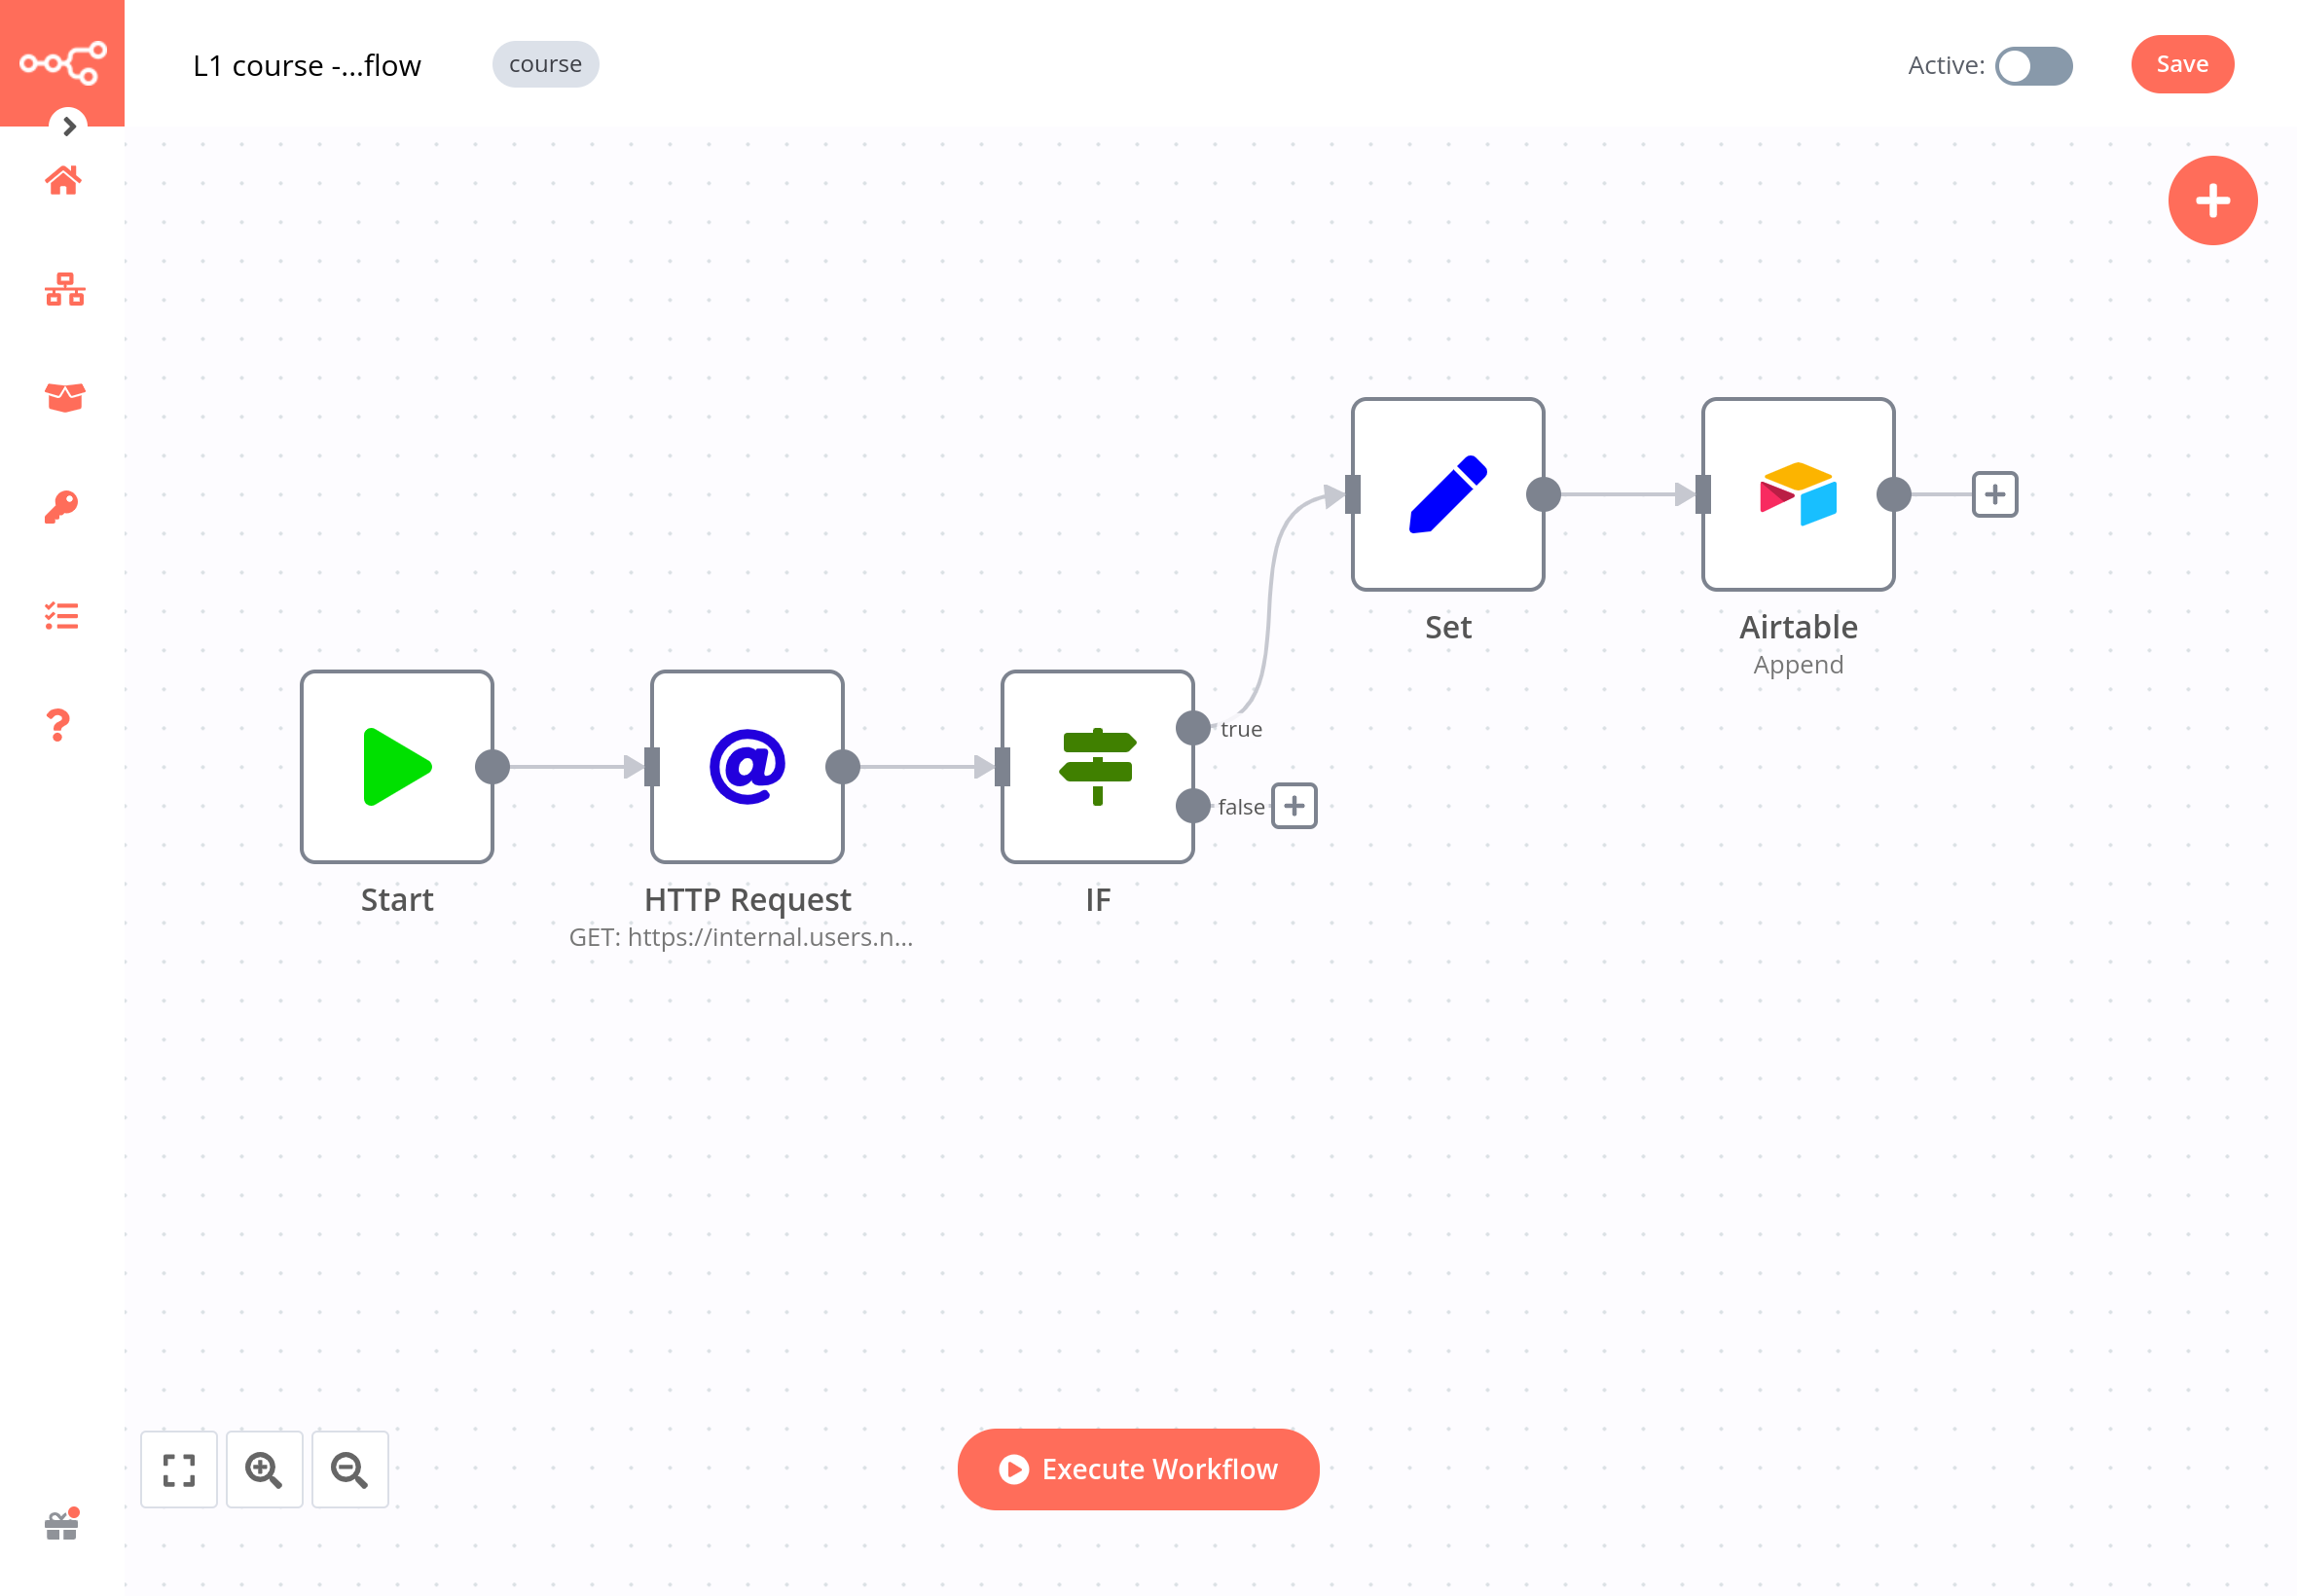 Workflow with the Set node